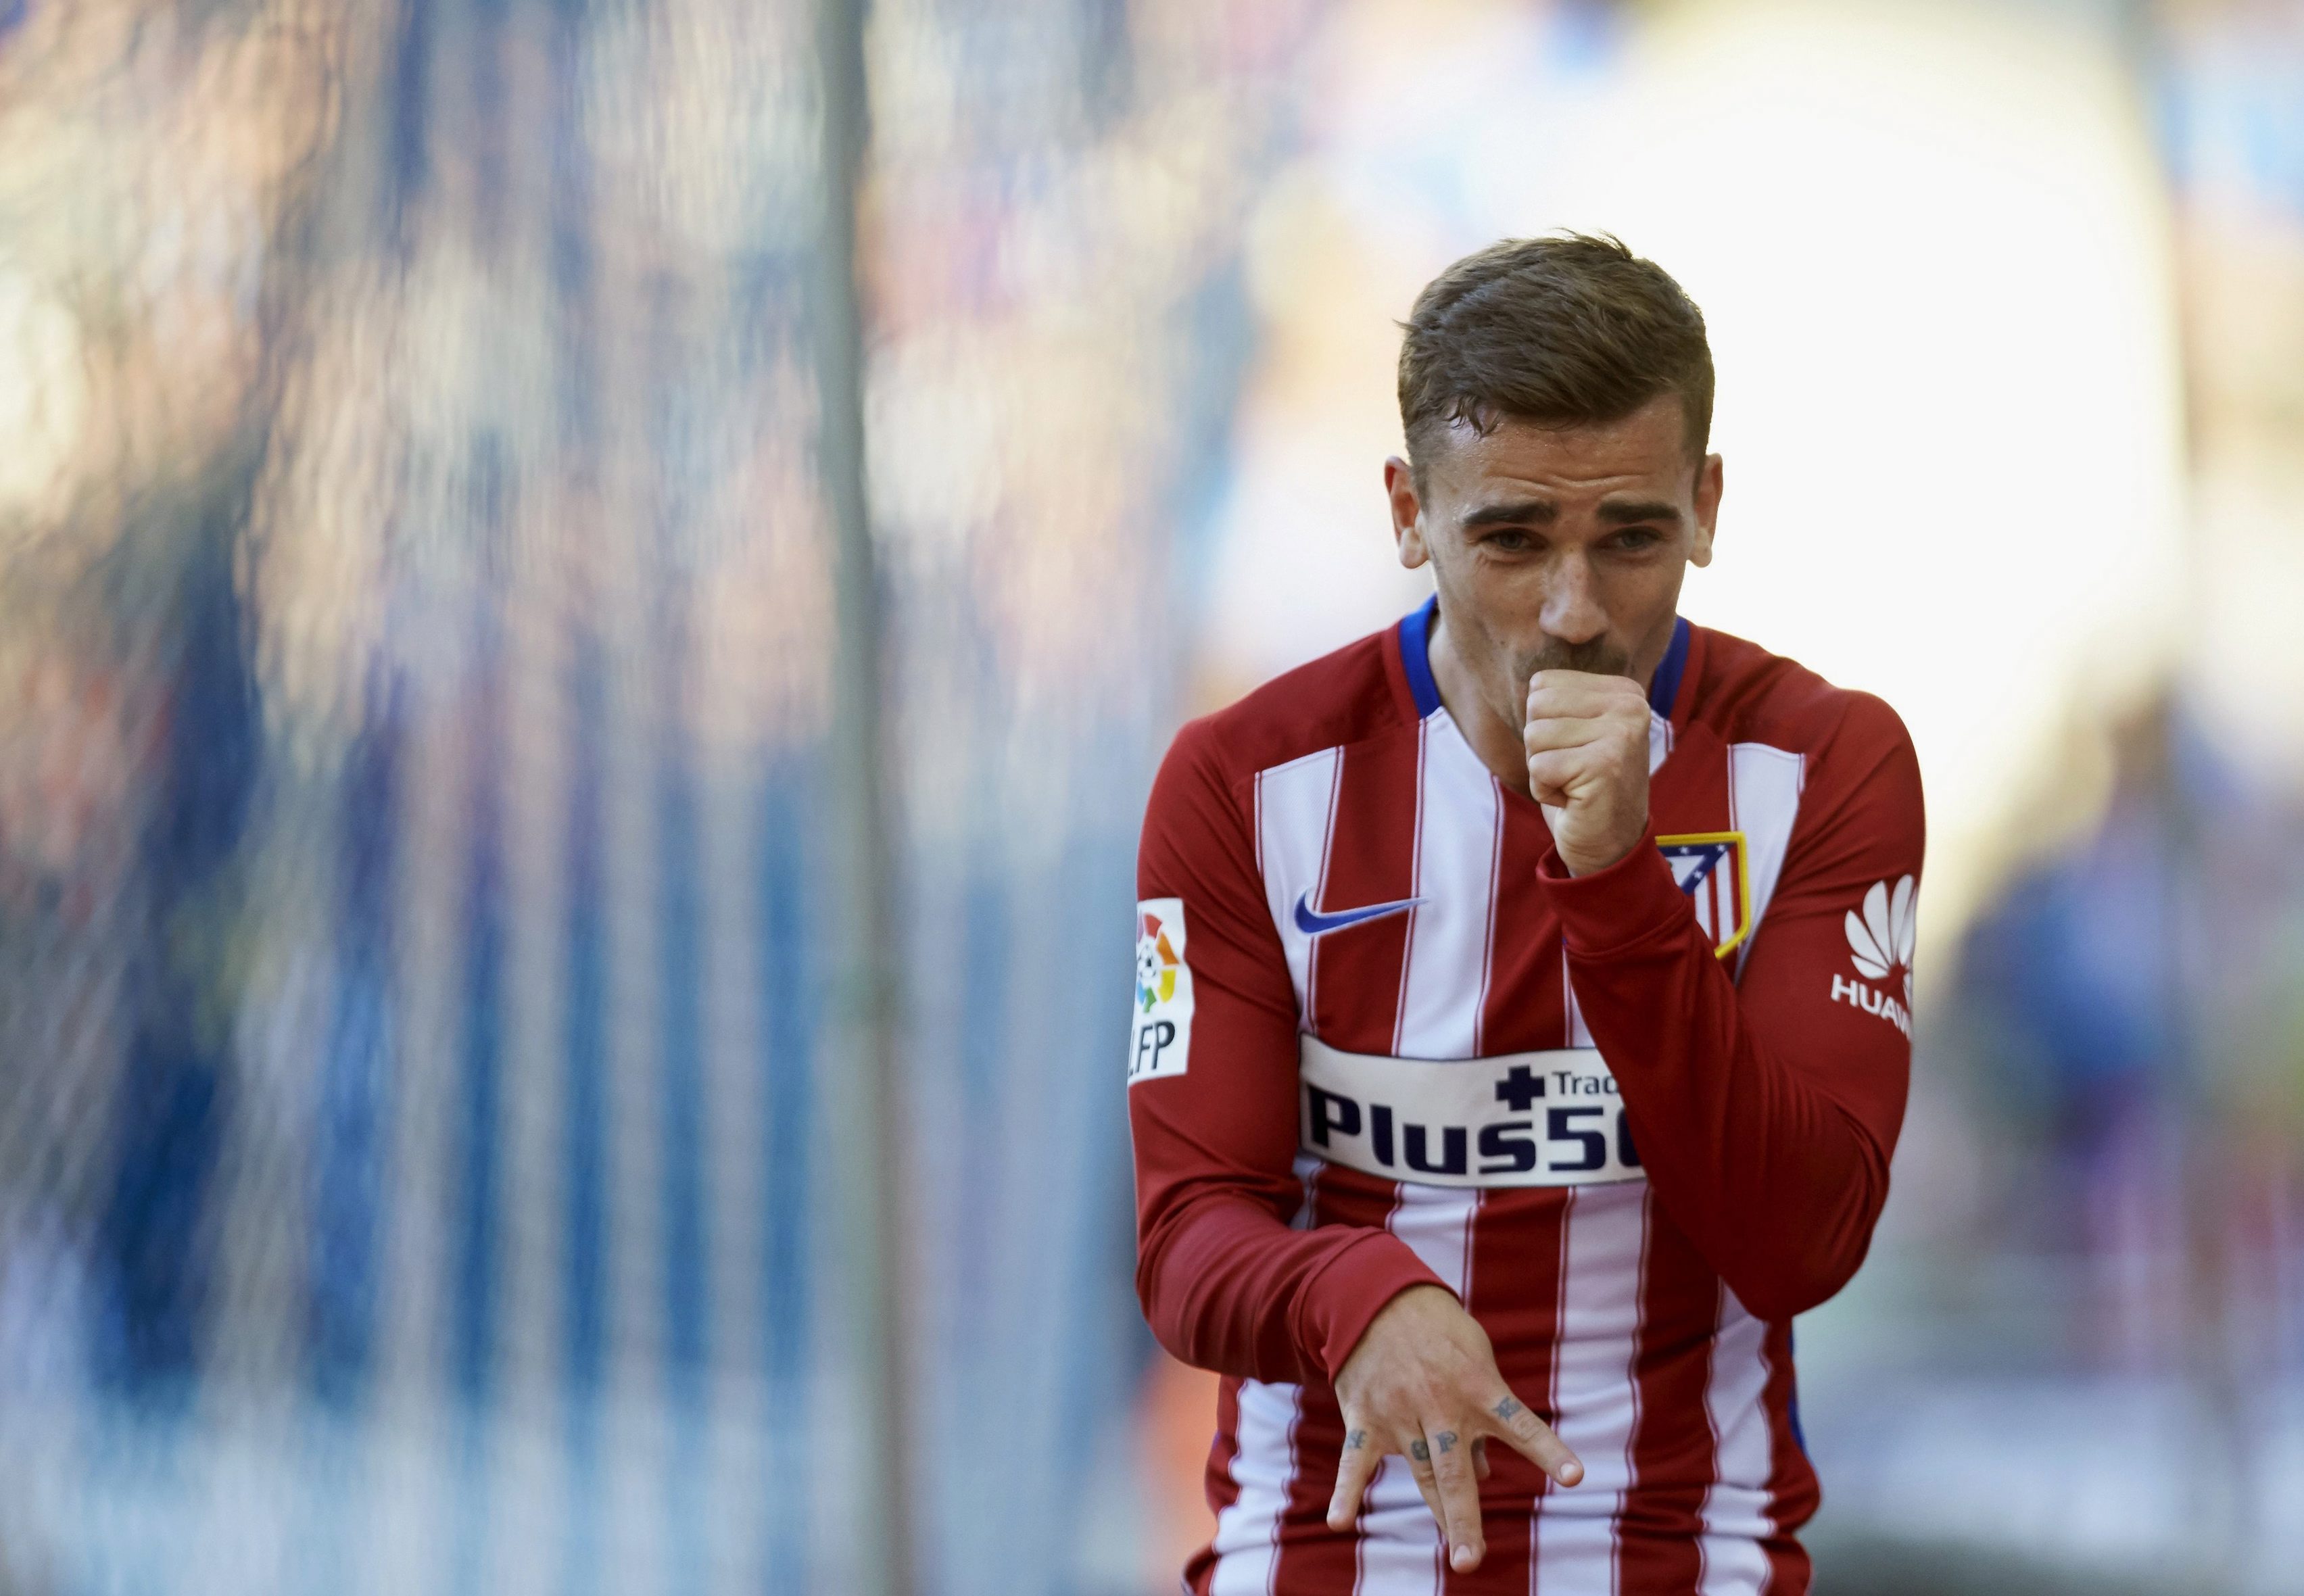 Griezmann has been on fire for Atletico Madrid since joining from Real Sociedad and was on point for his nation ending up as the highest goalscorer in Euro 2016. (Picture Courtesy - AFP/Getty Images)